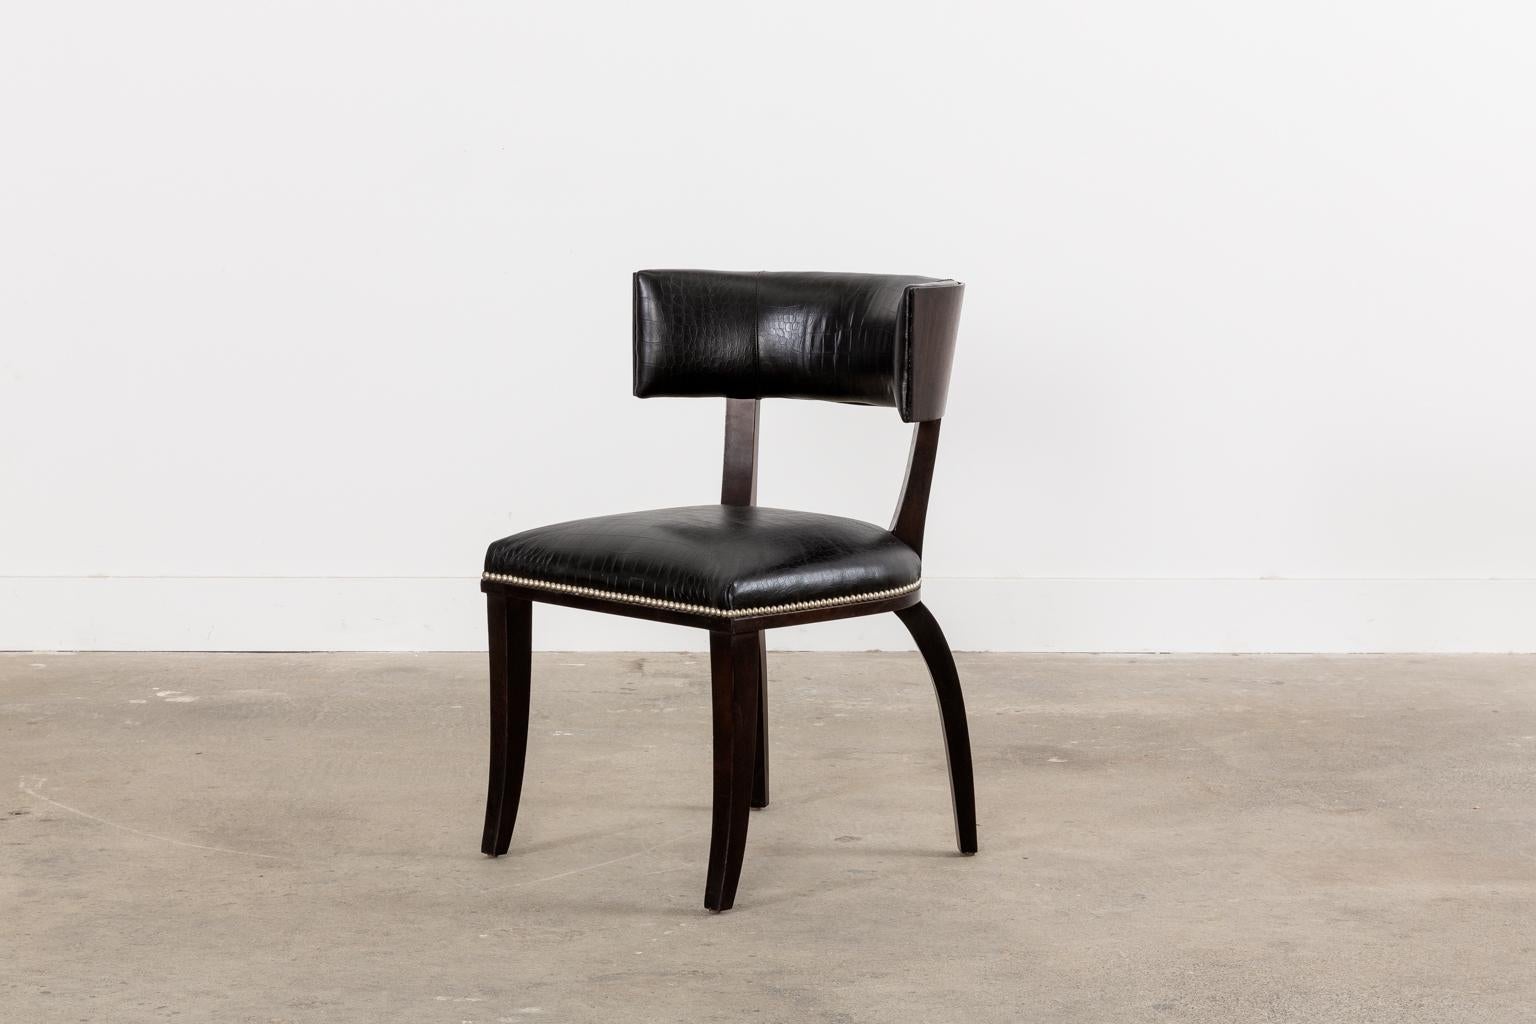 Gorgeous pair of neoclassical klismos style dining chairs designed by Ralph Lauren. The Clivedon dining chair features an ebonized hardwood frame with a gracefully curved, conforming backrest. The rest is veneered with a rich faux Macassar finish on